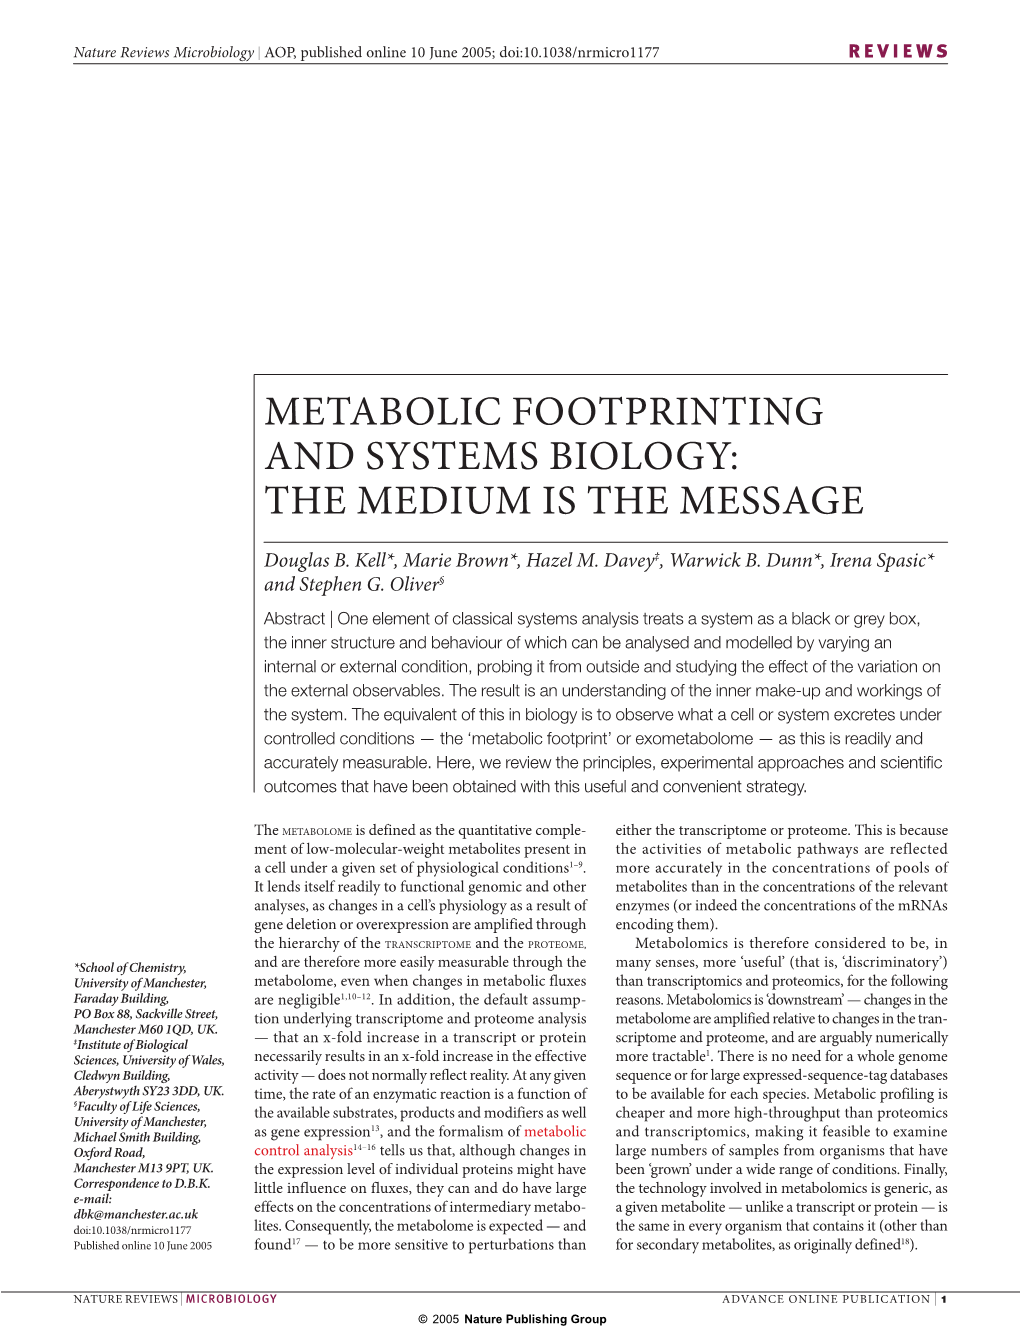 Metabolic Footprinting and Systems Biology: the Medium Is the Message